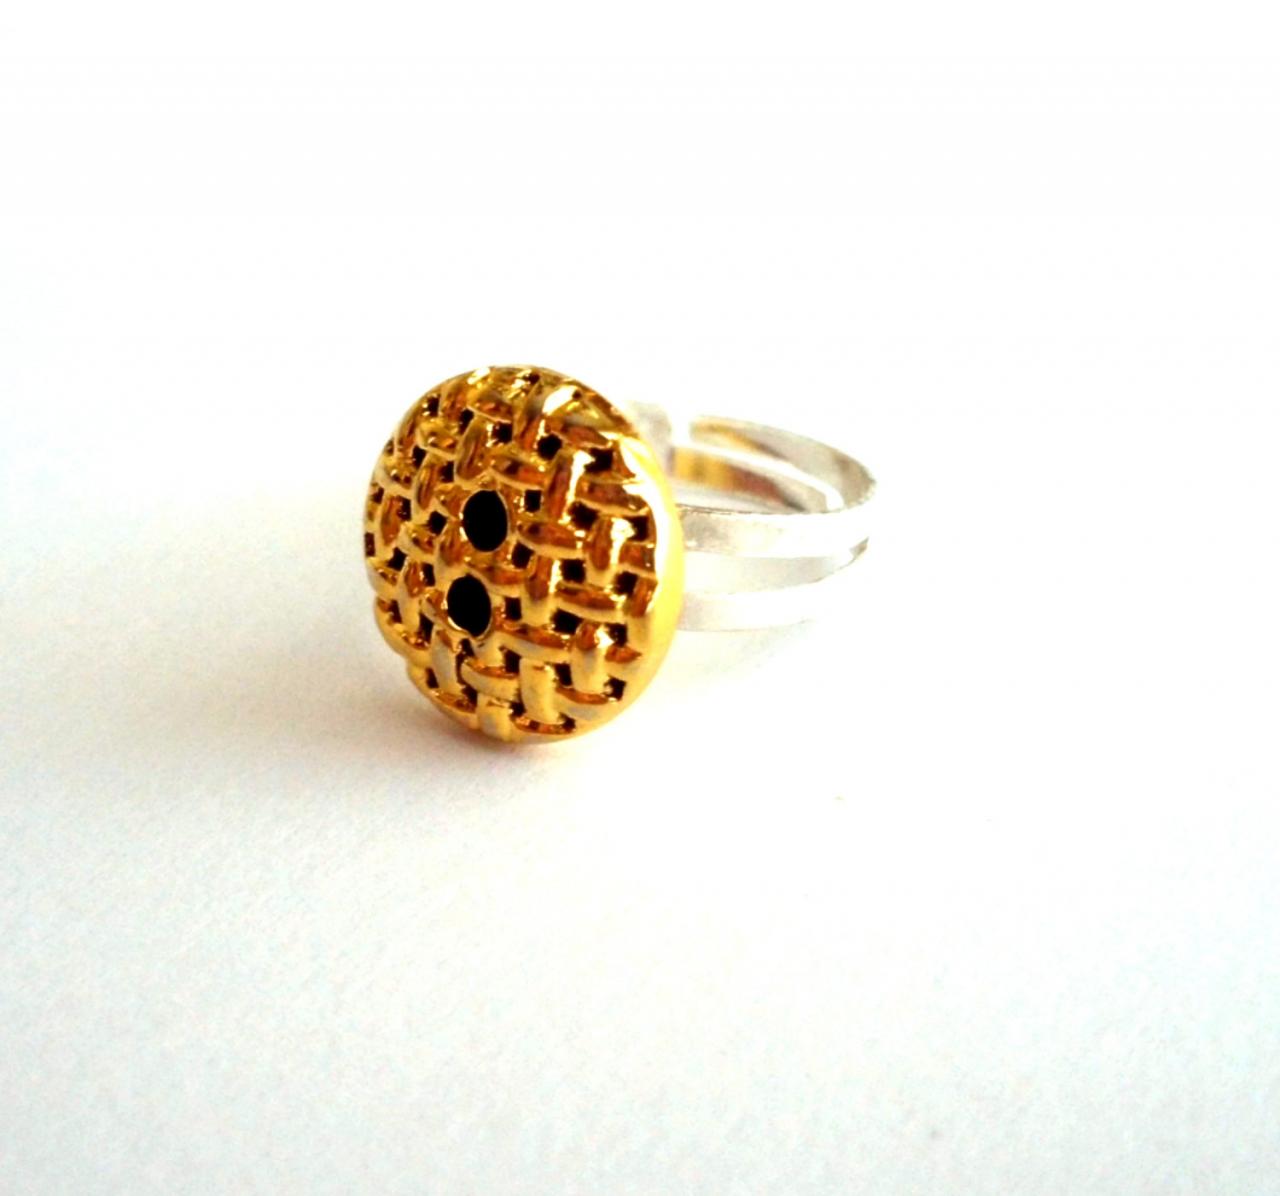 Adjustable Ring Handmade Of Golden Vintage Button, Ooak, Recycled, Upcycled, Repurposed, Boho, Ecofriendly